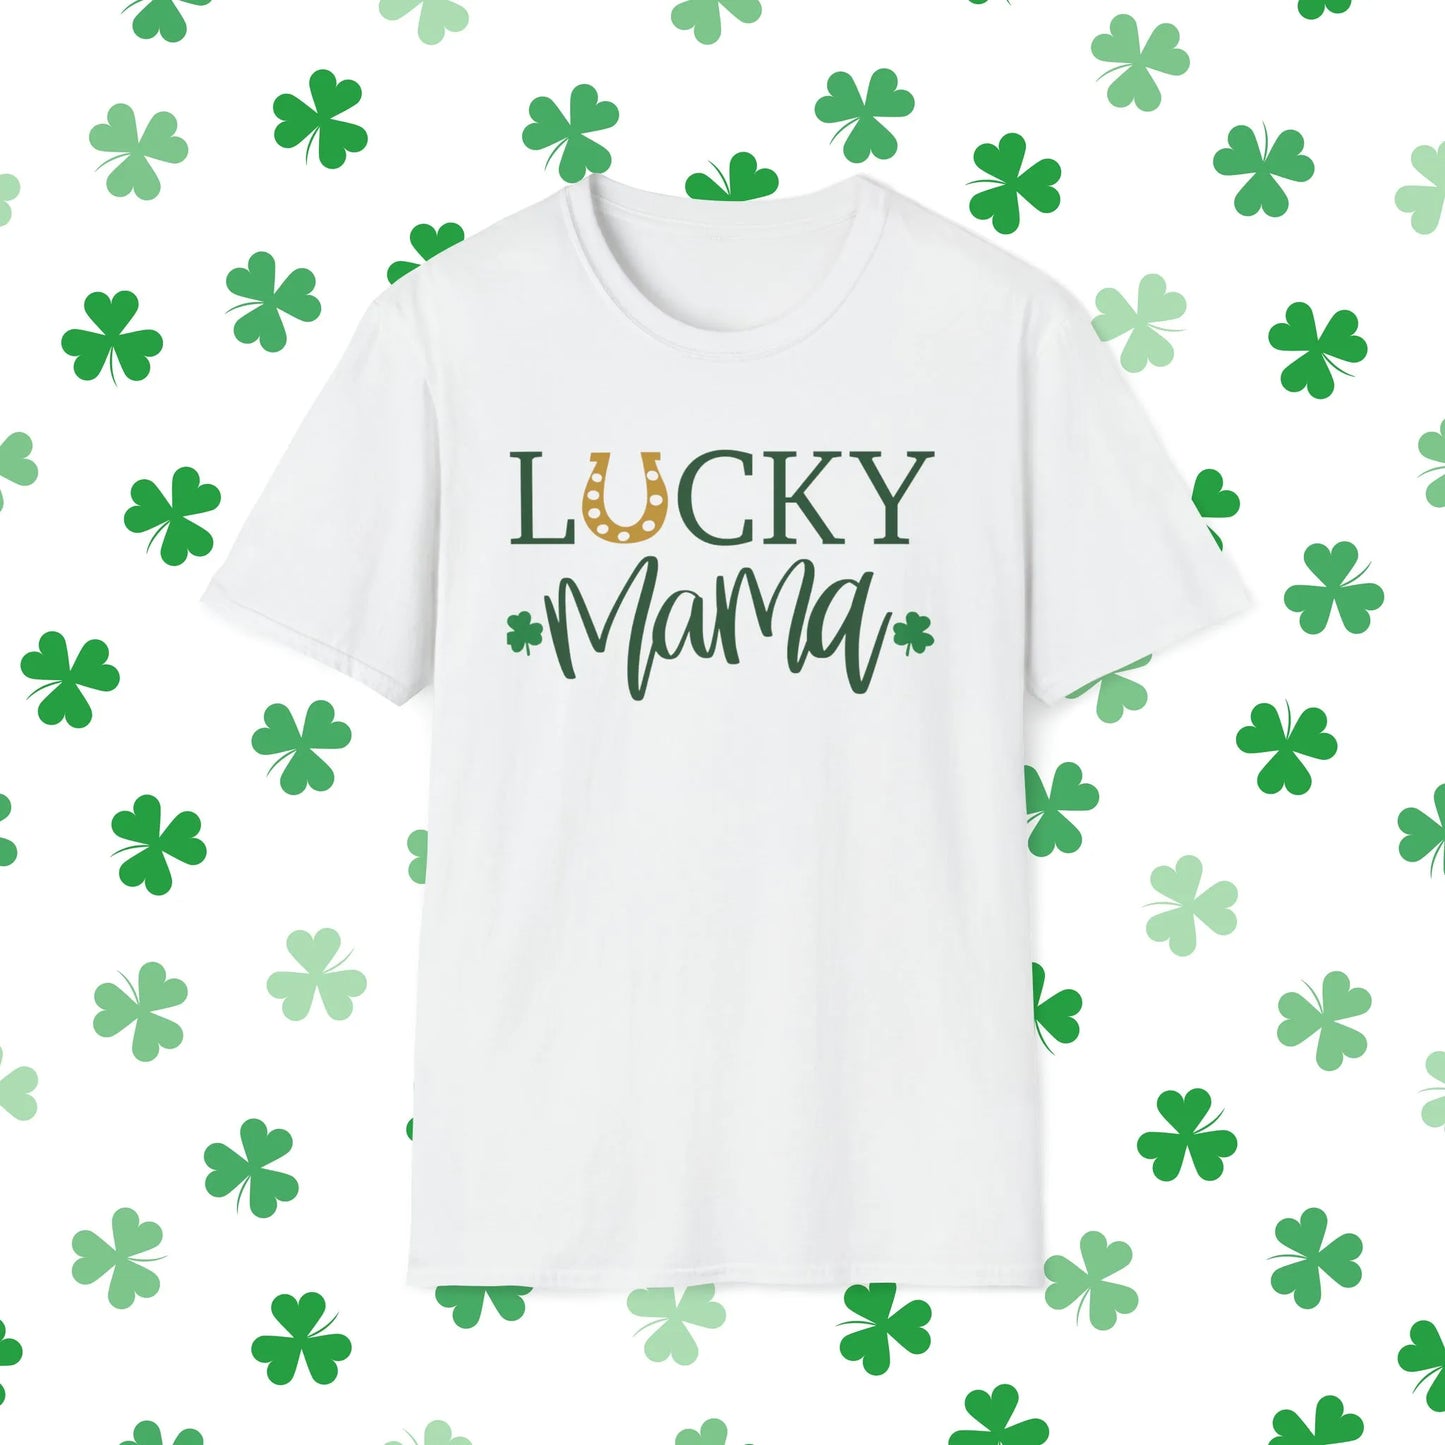 Lucky Mama St. Patrick's Day T-Shirt - Comfort & Charm - Lucky Mama Shirt White Front